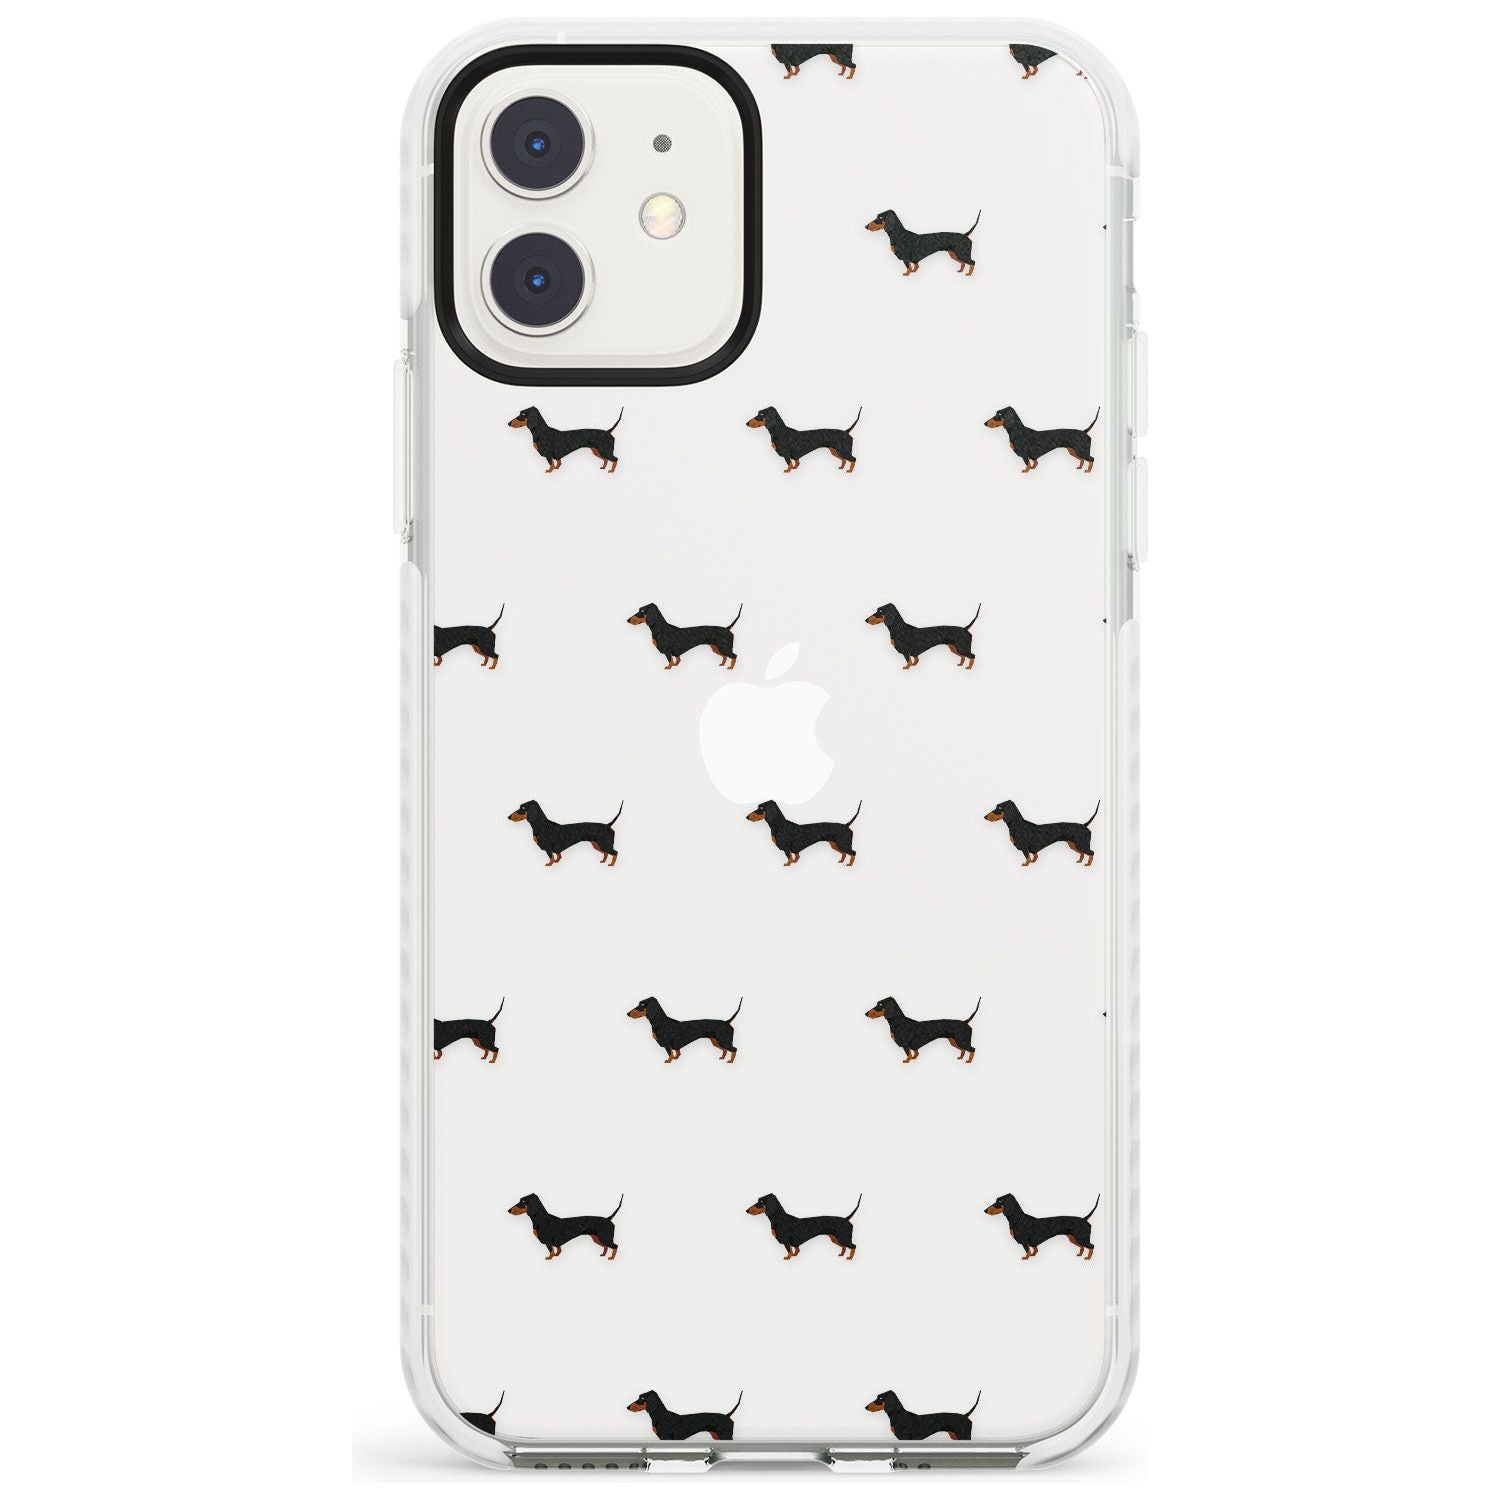 Dachshund Dog Pattern Clear Impact Phone Case for iPhone 11